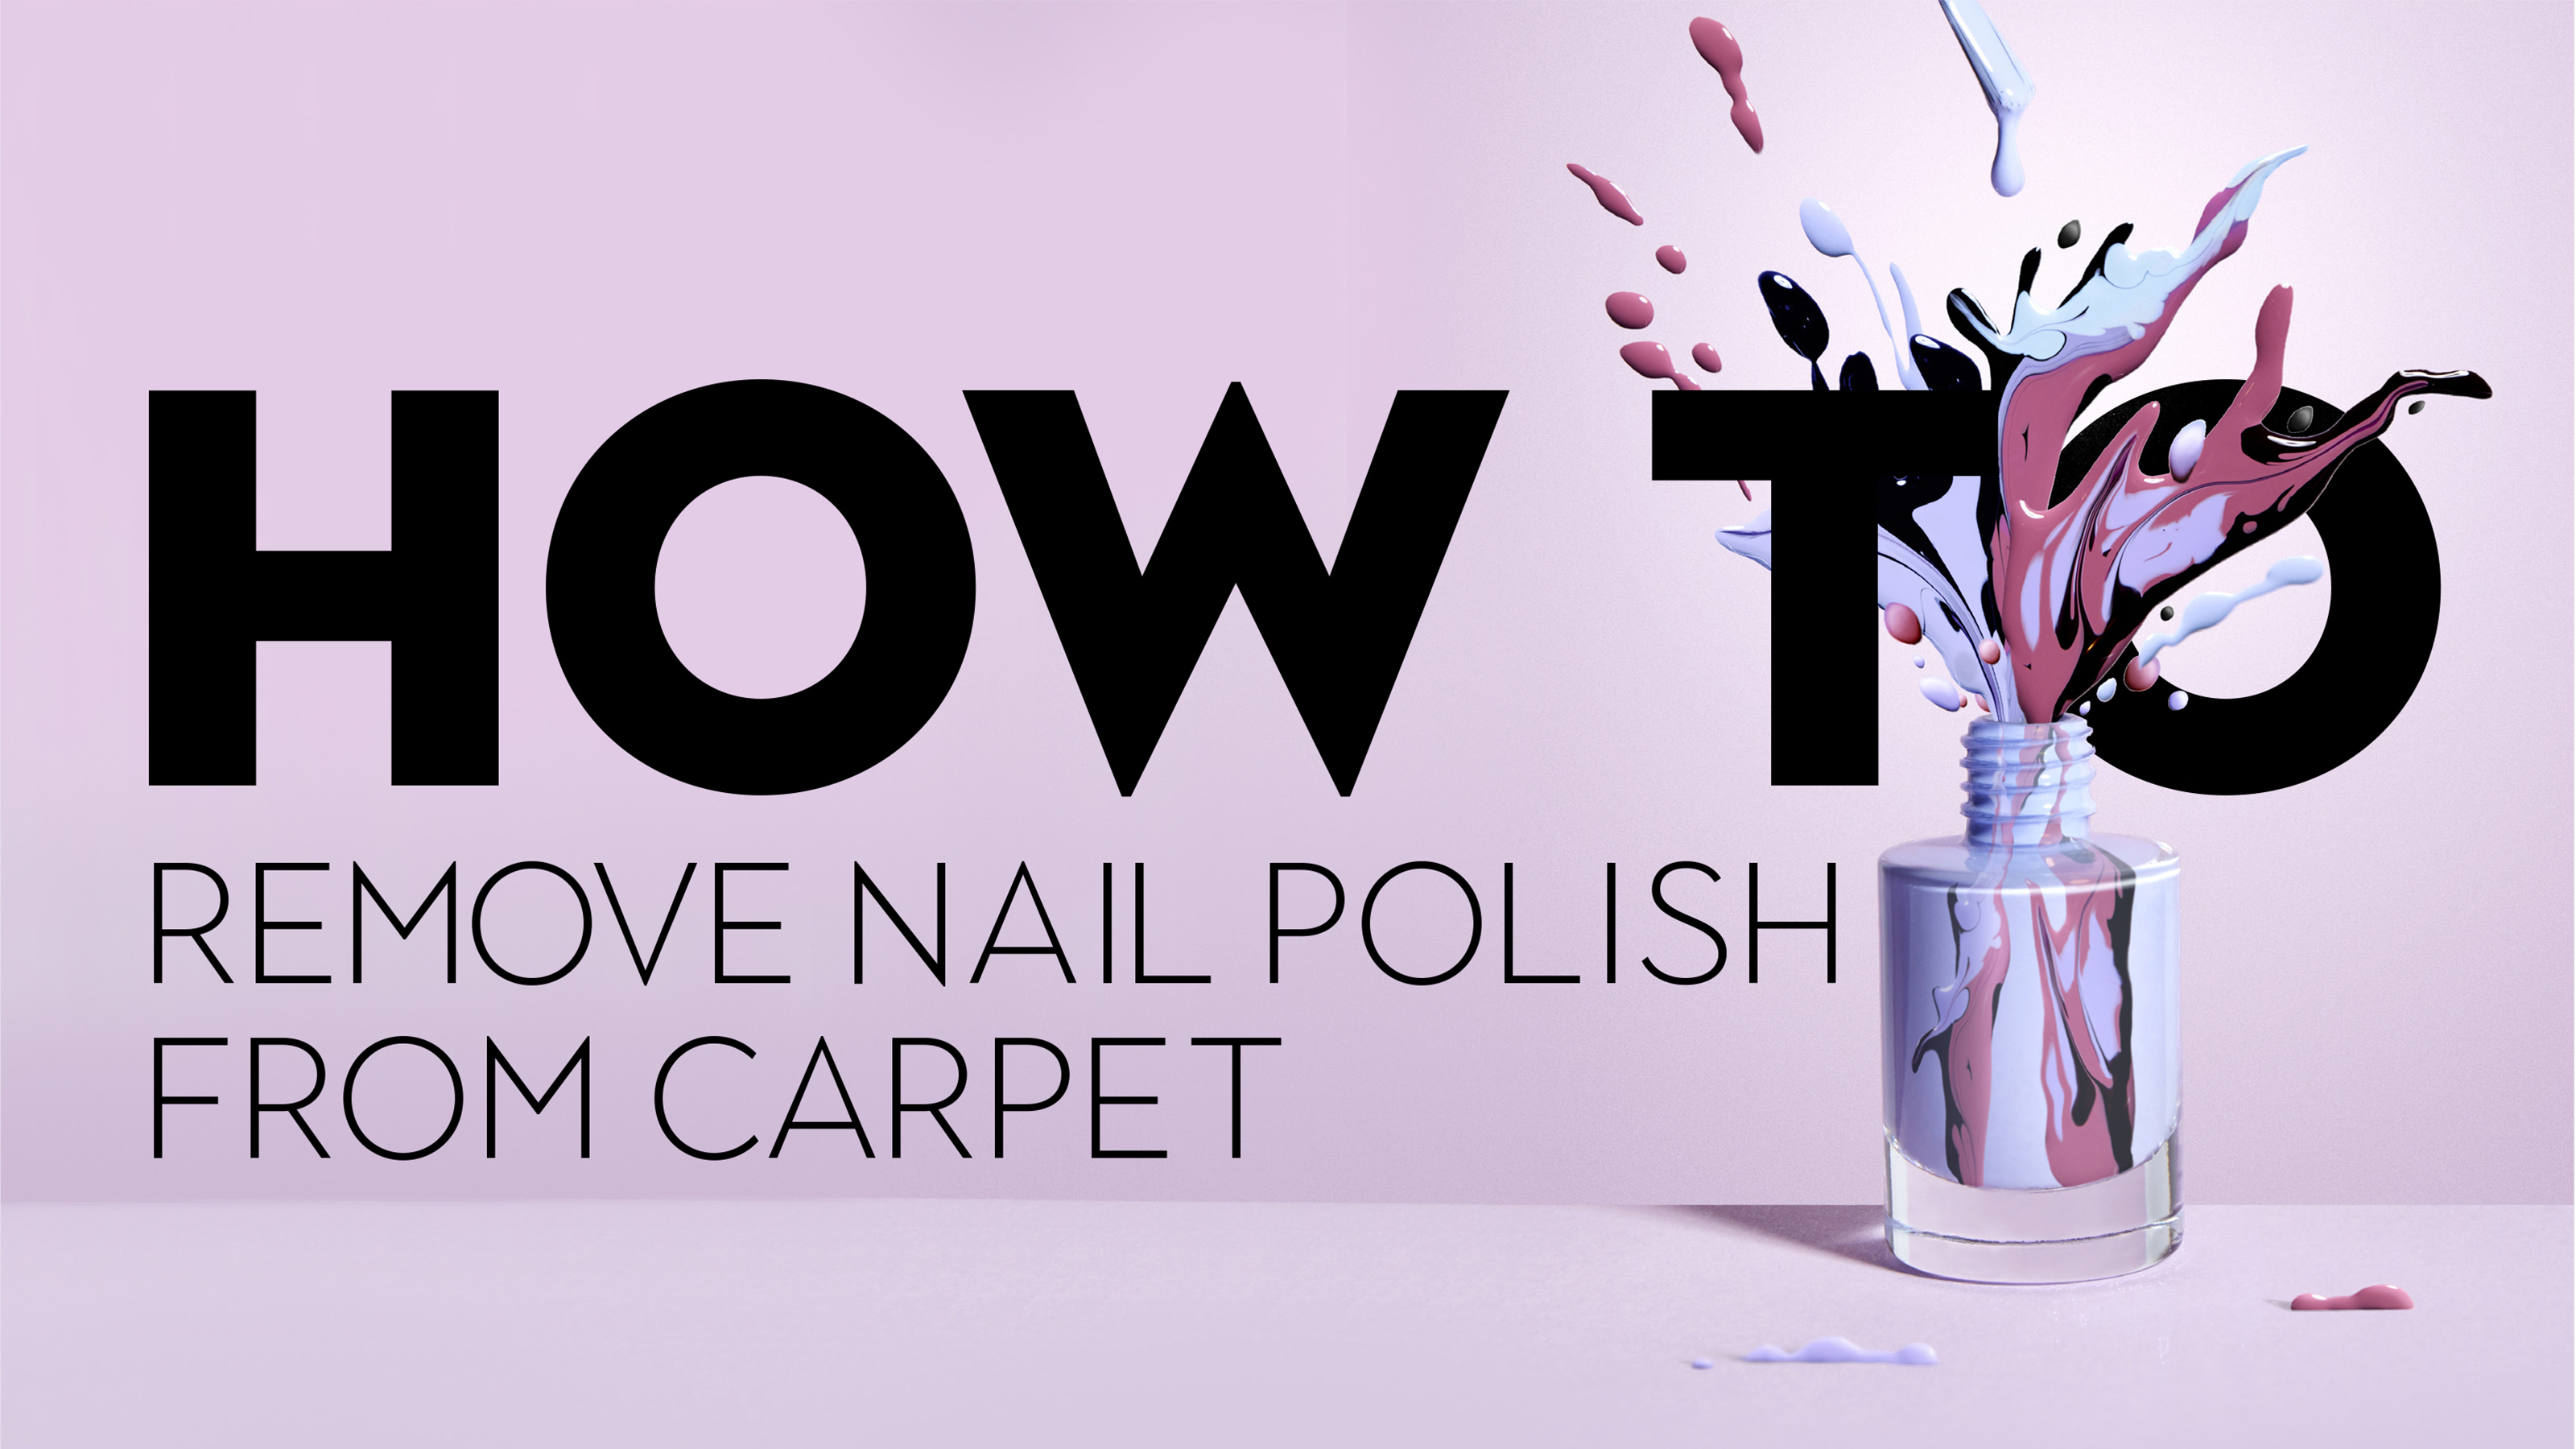 How to remove nail polish from carpet, furniture and more | Real Homes